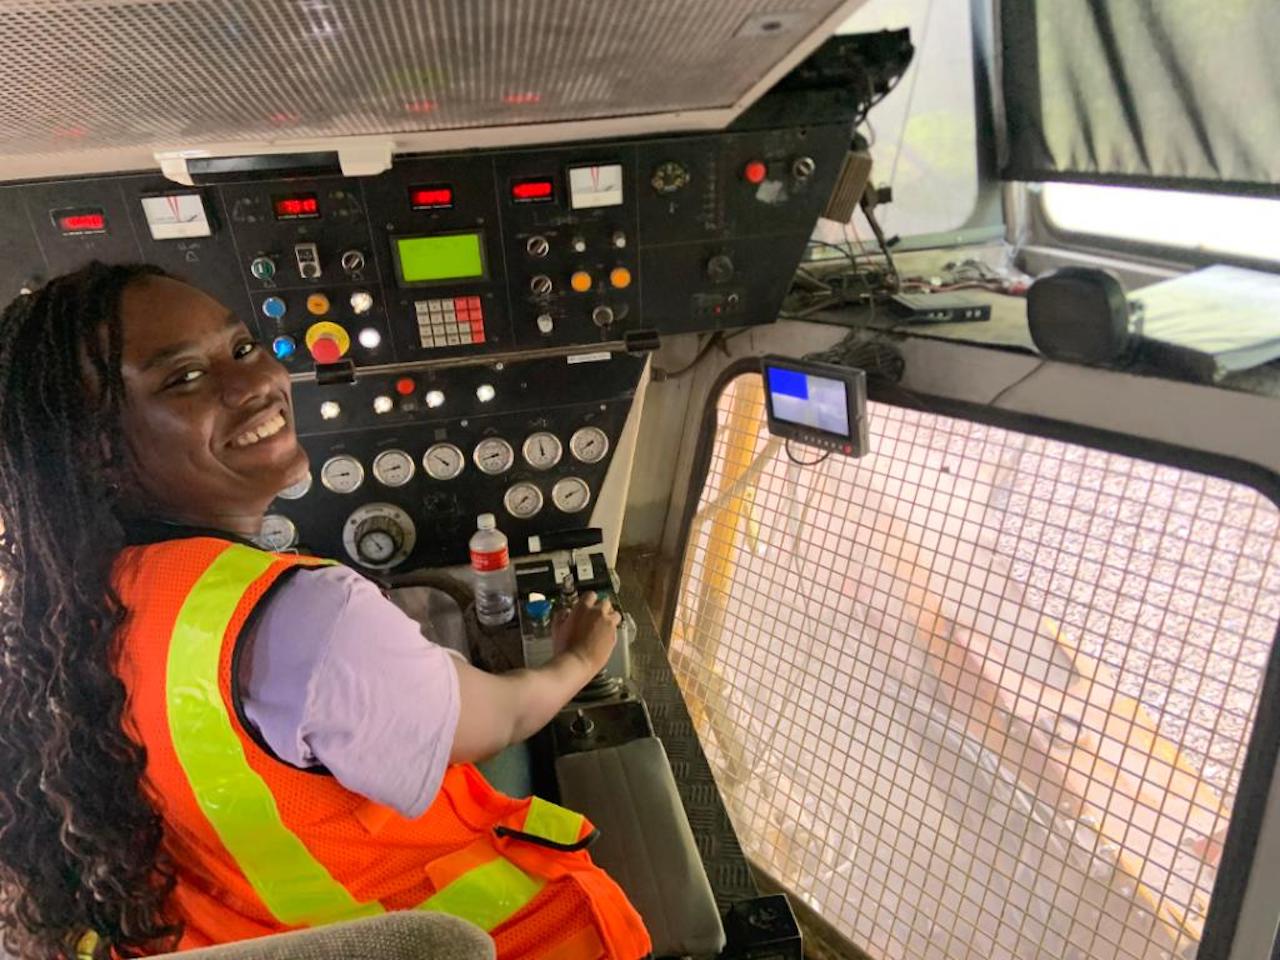 During a trip to Fort Worth, summer intern Mariam Okunubi had a chance to see what it's like behind the controls of a ballast undercutter.